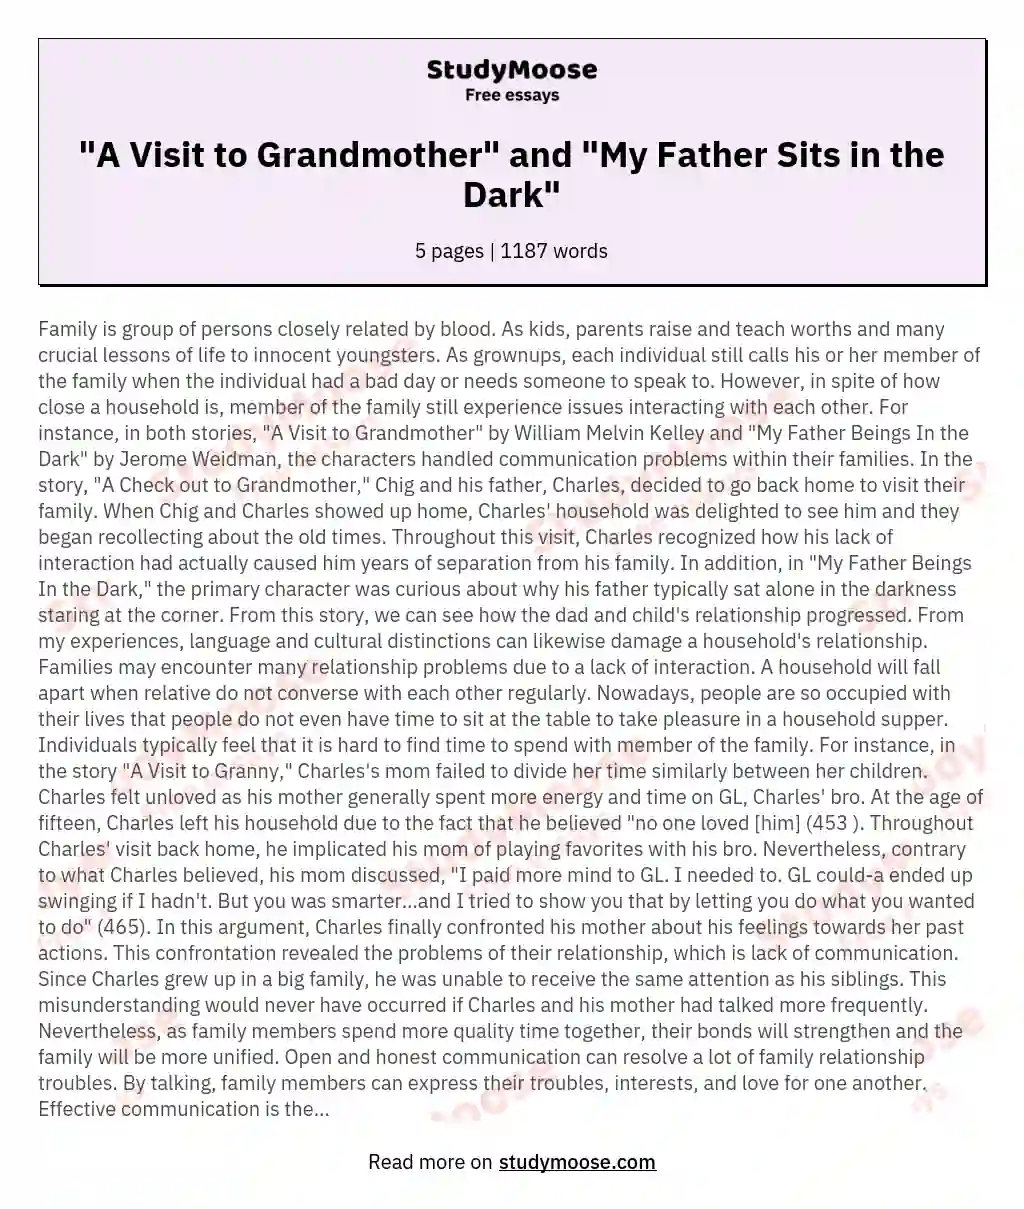 "A Visit to Grandmother" and "My Father Sits in the Dark" essay